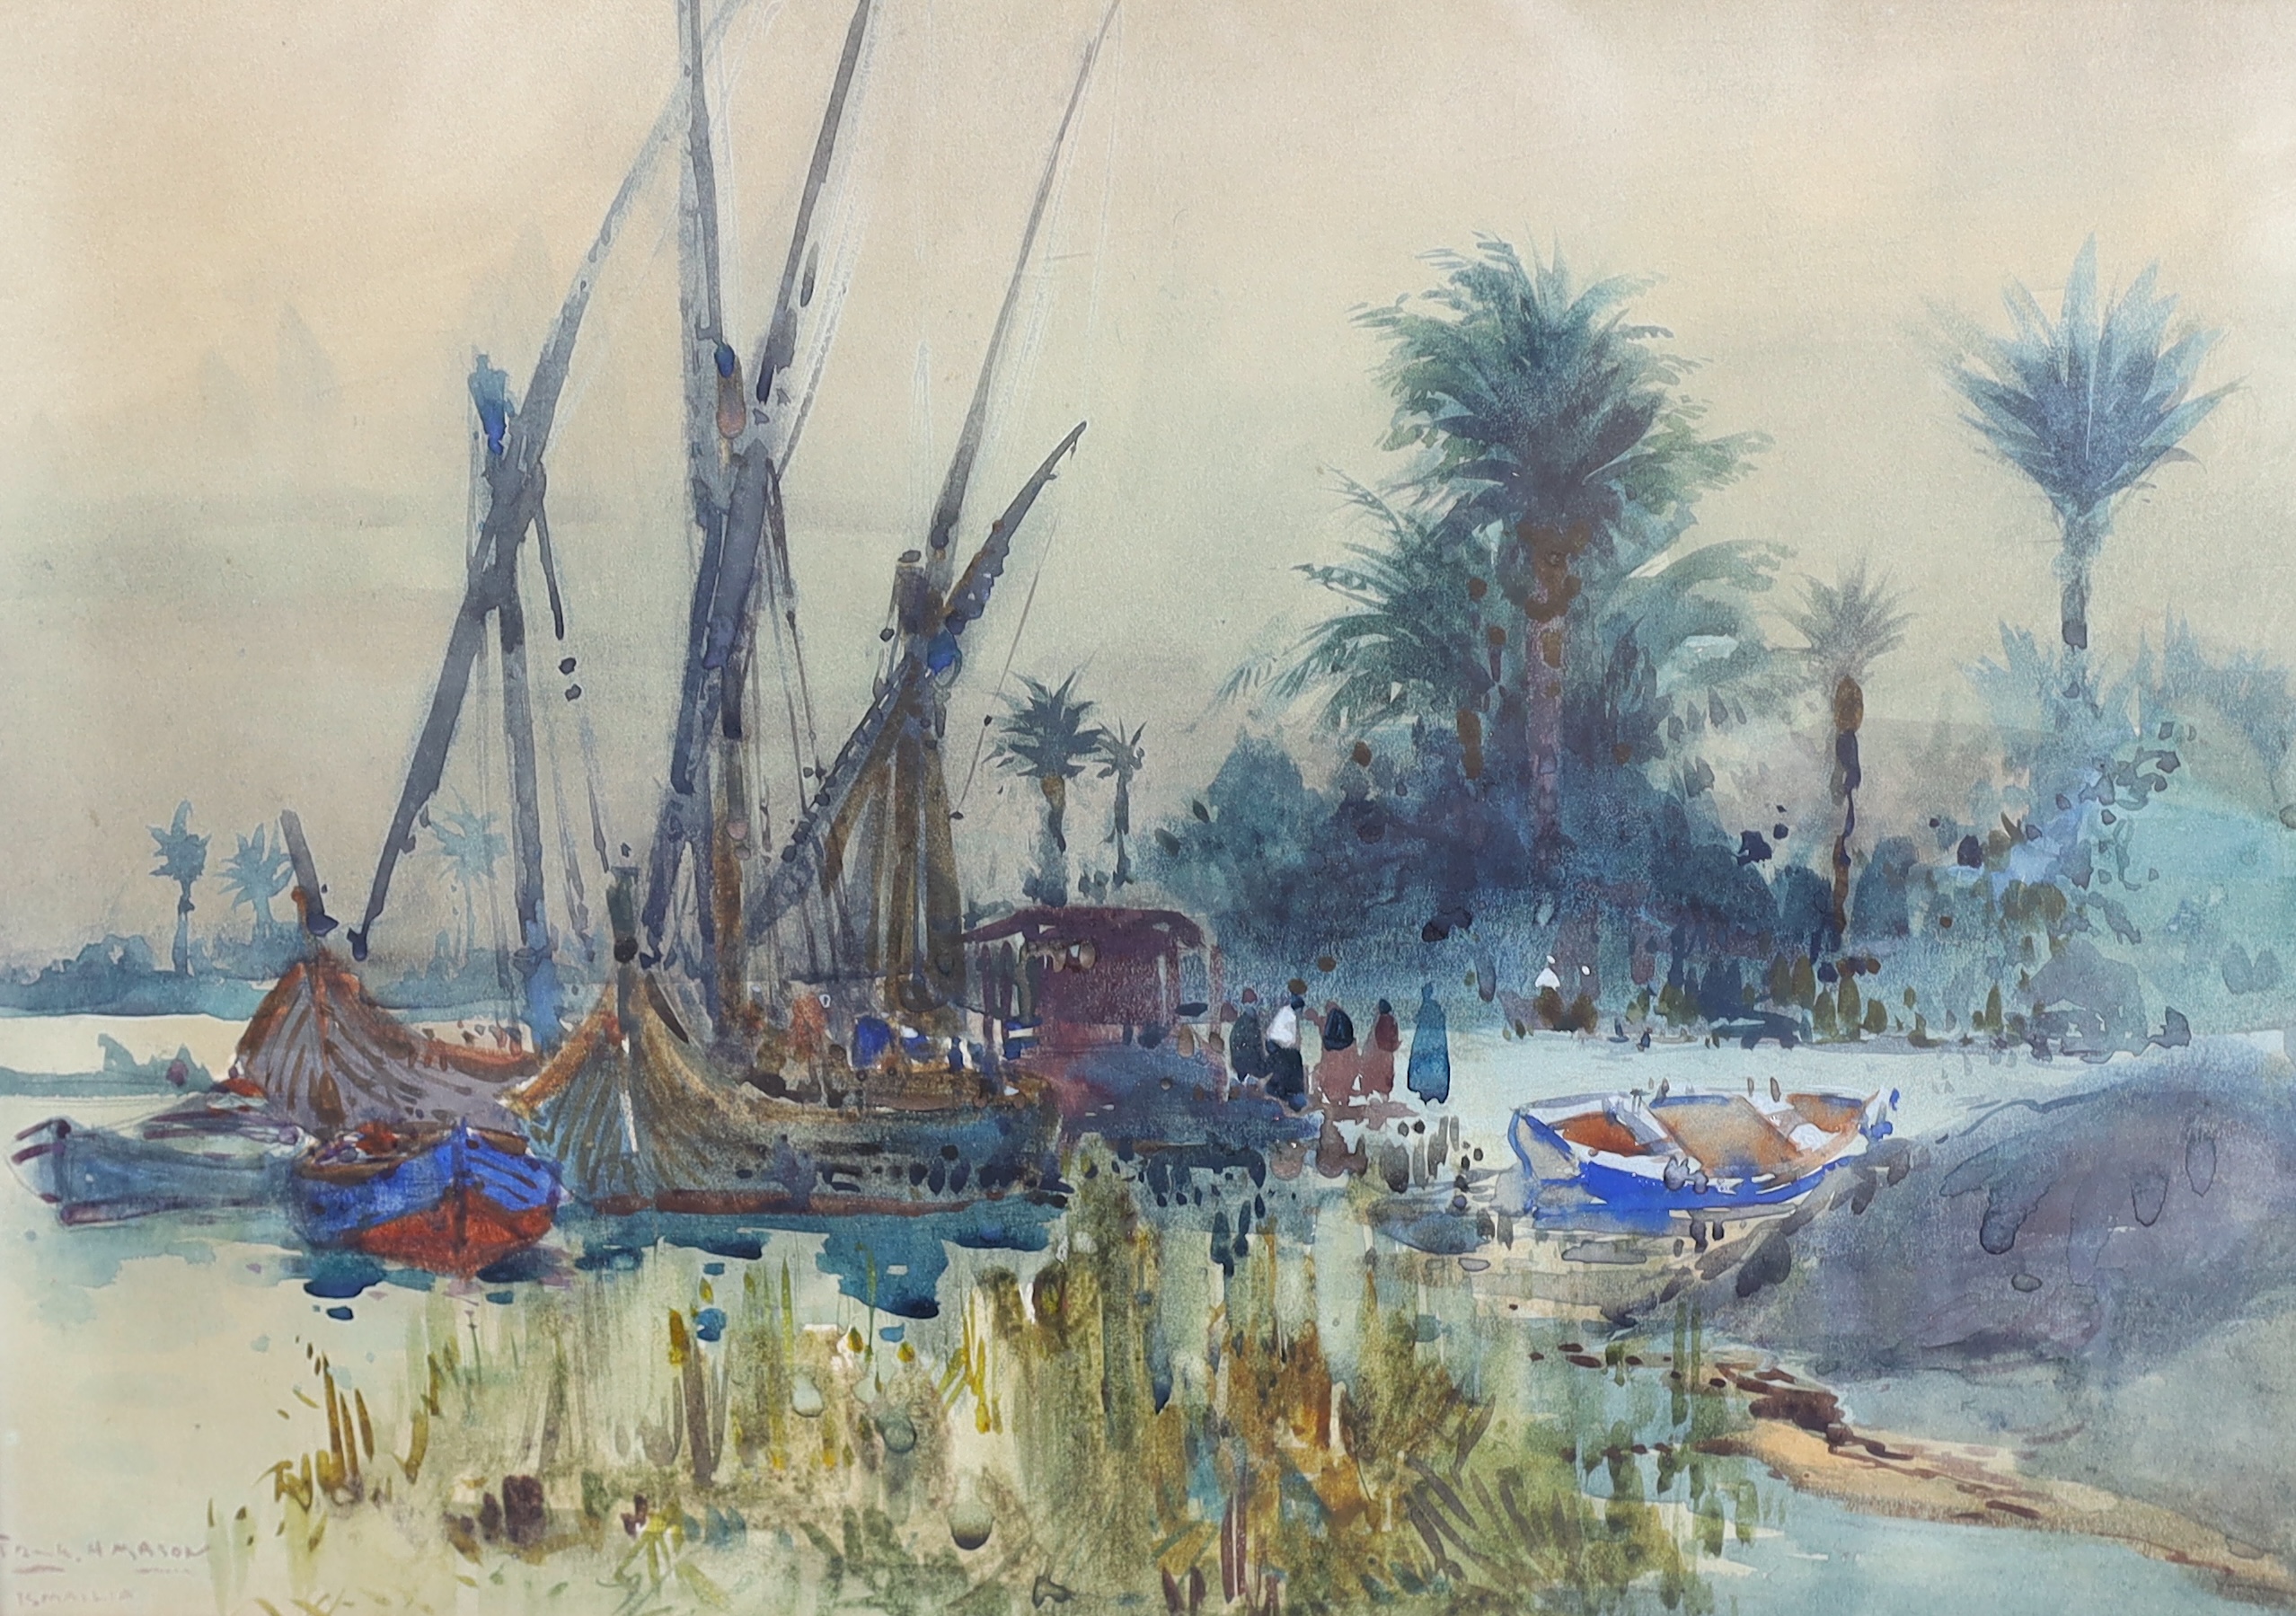 Frank H. Mason (British, 1875-1965), pair of watercolours, 'Ismailia', signed and titled, 24.5 x 34cm